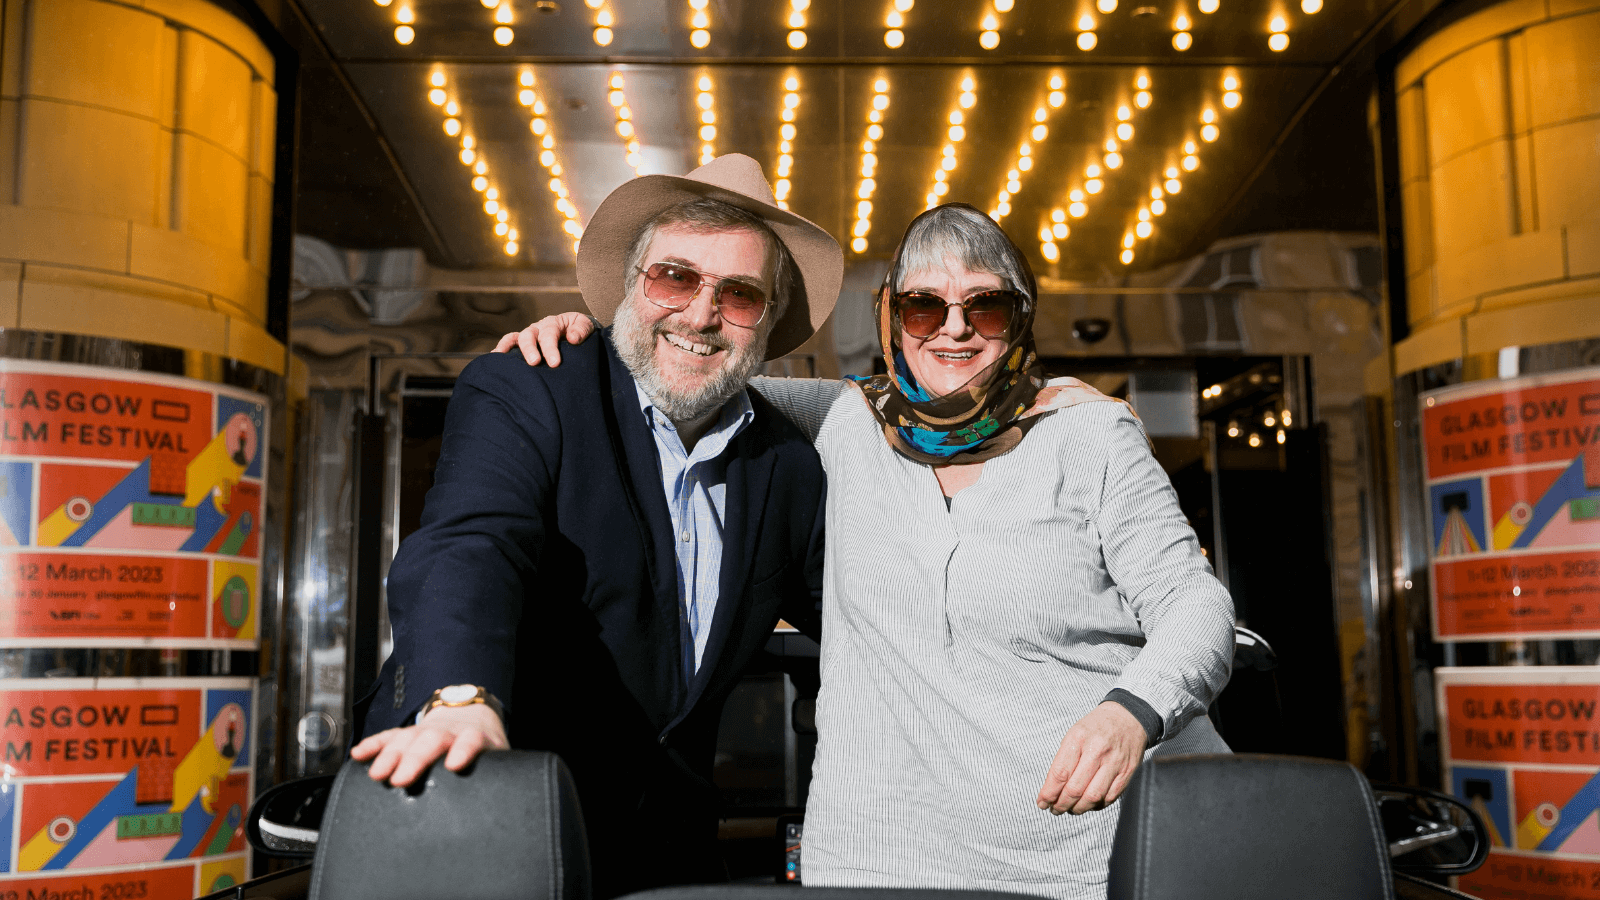 Courtesy of GFF  - This image from the launch of the Glasgow Film Festival 2023 features previous Co-Director of the festival Allan Hunter and current Director Allison Gardner standing together in front of the Glasgow Film Theatre. They look happy and wear sunglasses. Allan wears a suit and a hat, and Allison wears a headscarf wrapped over her head and shoulders.